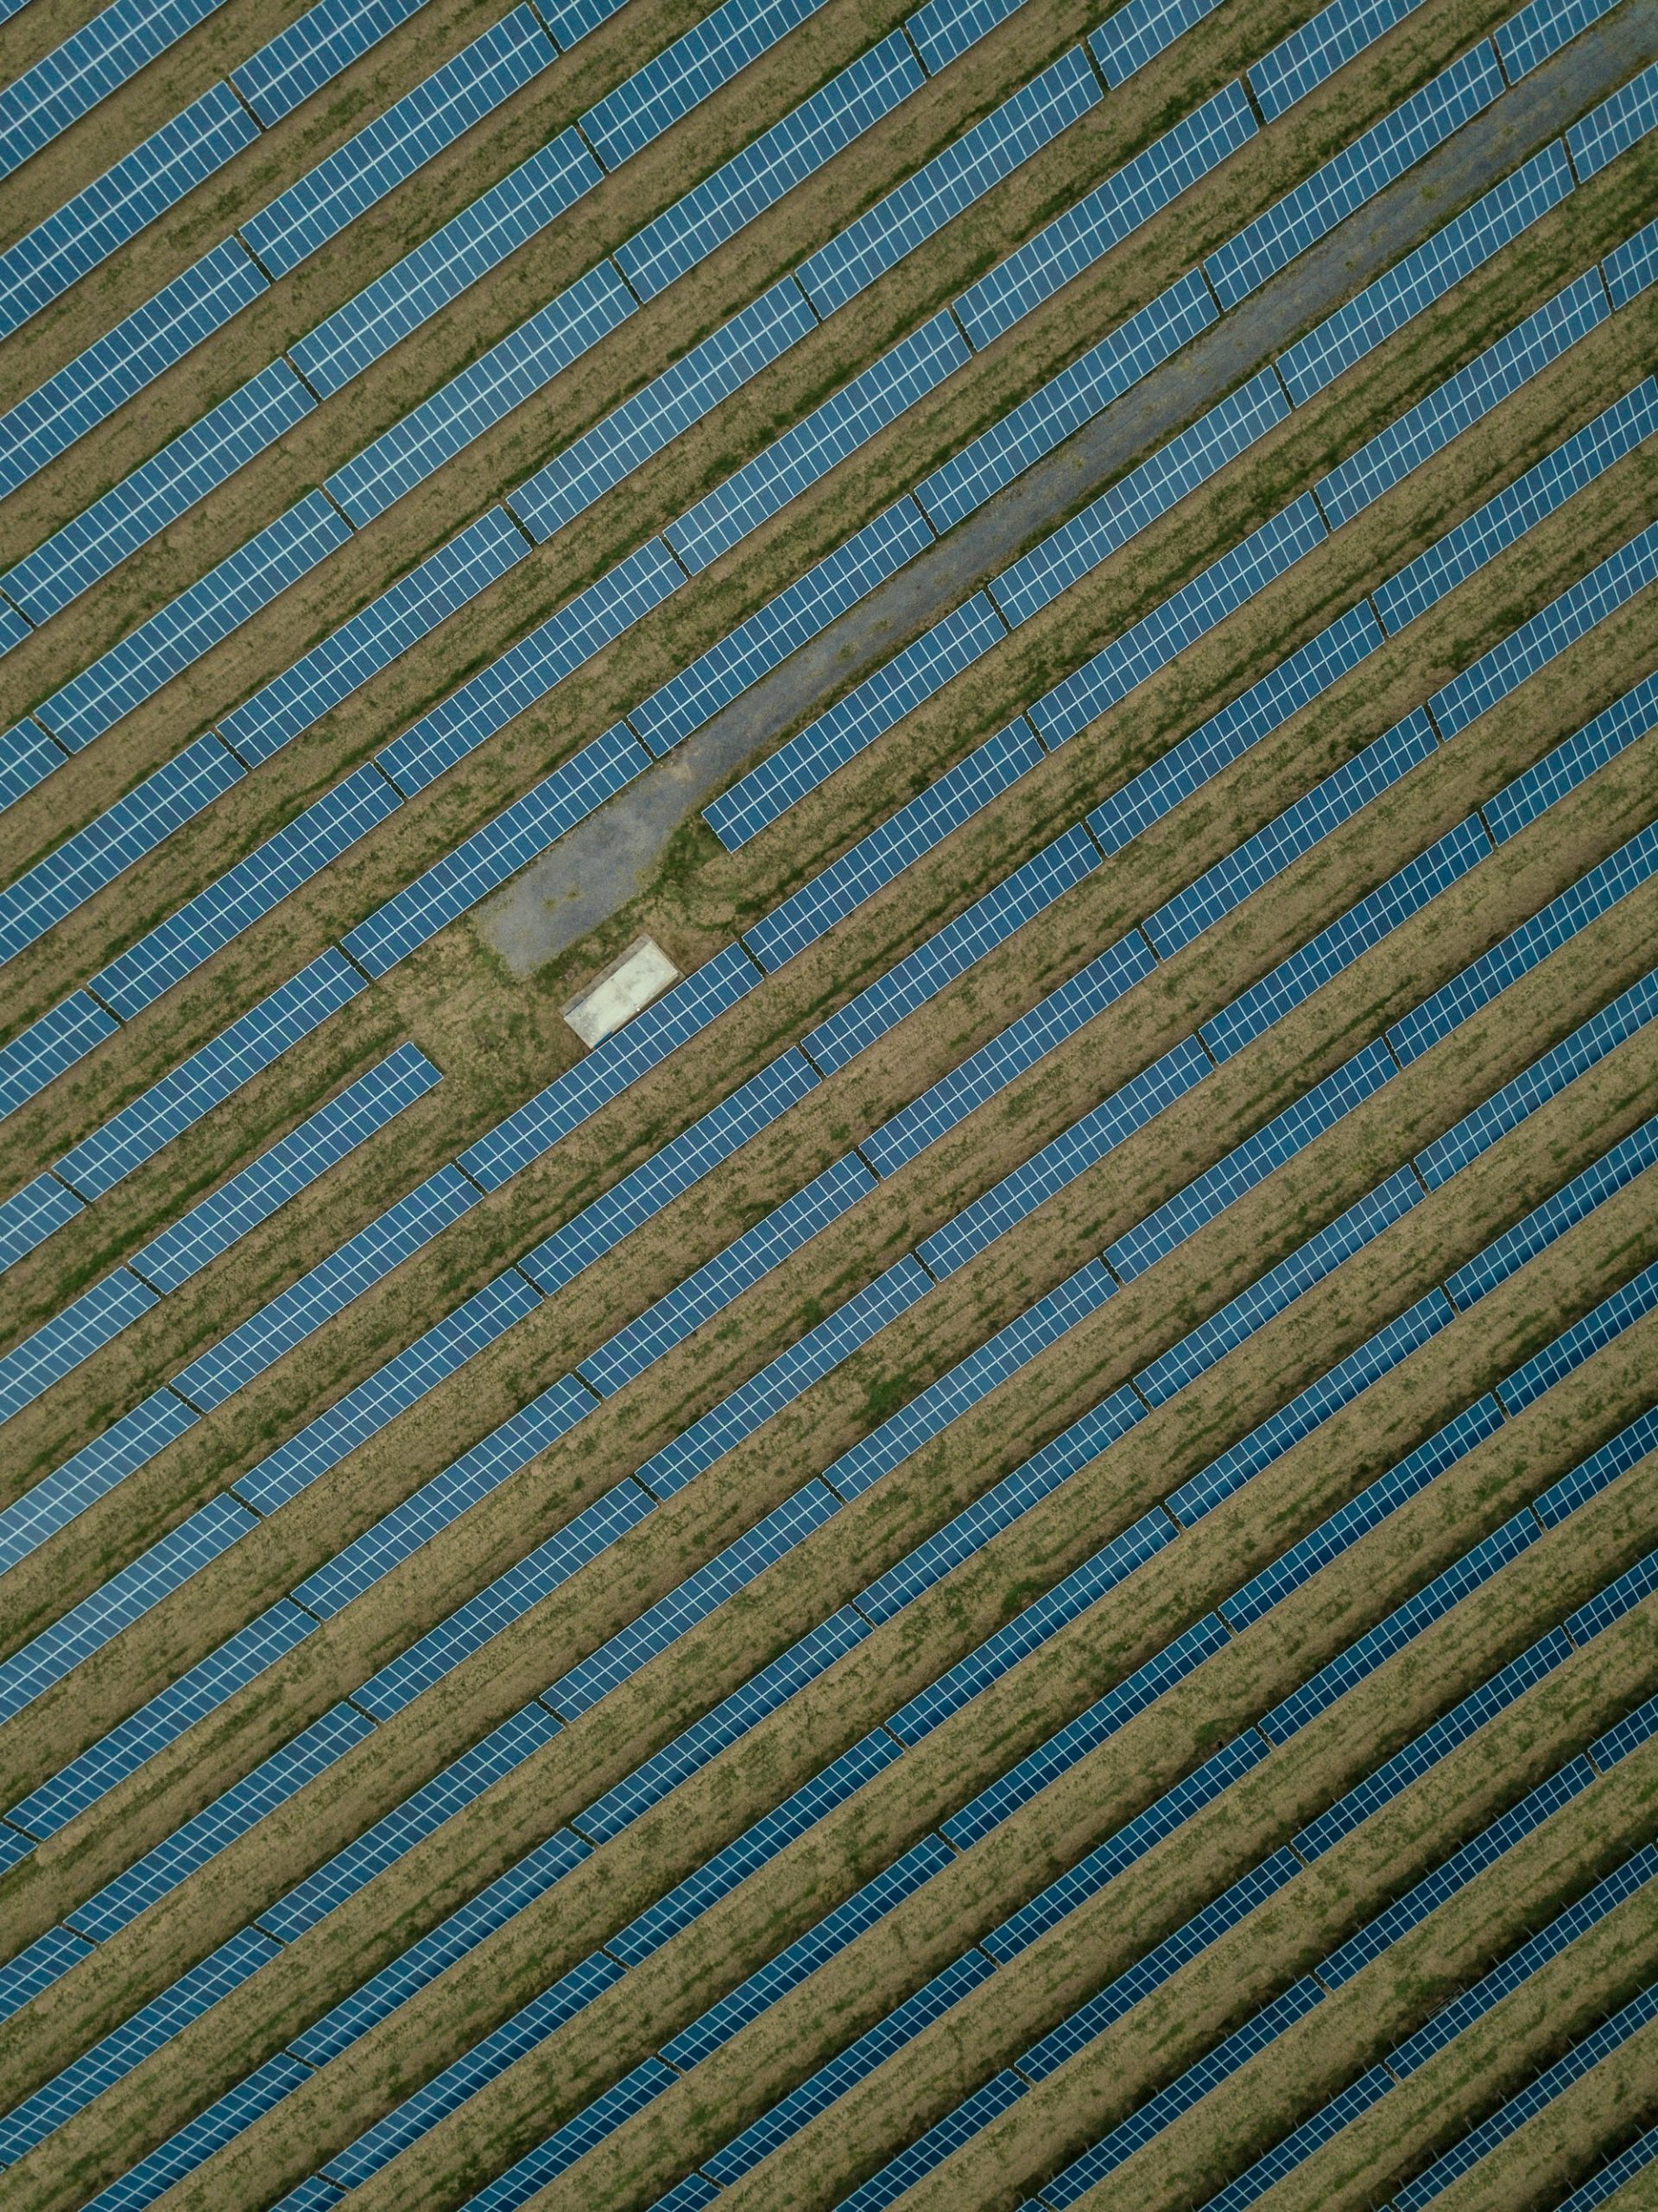 photo of a solar farm from above